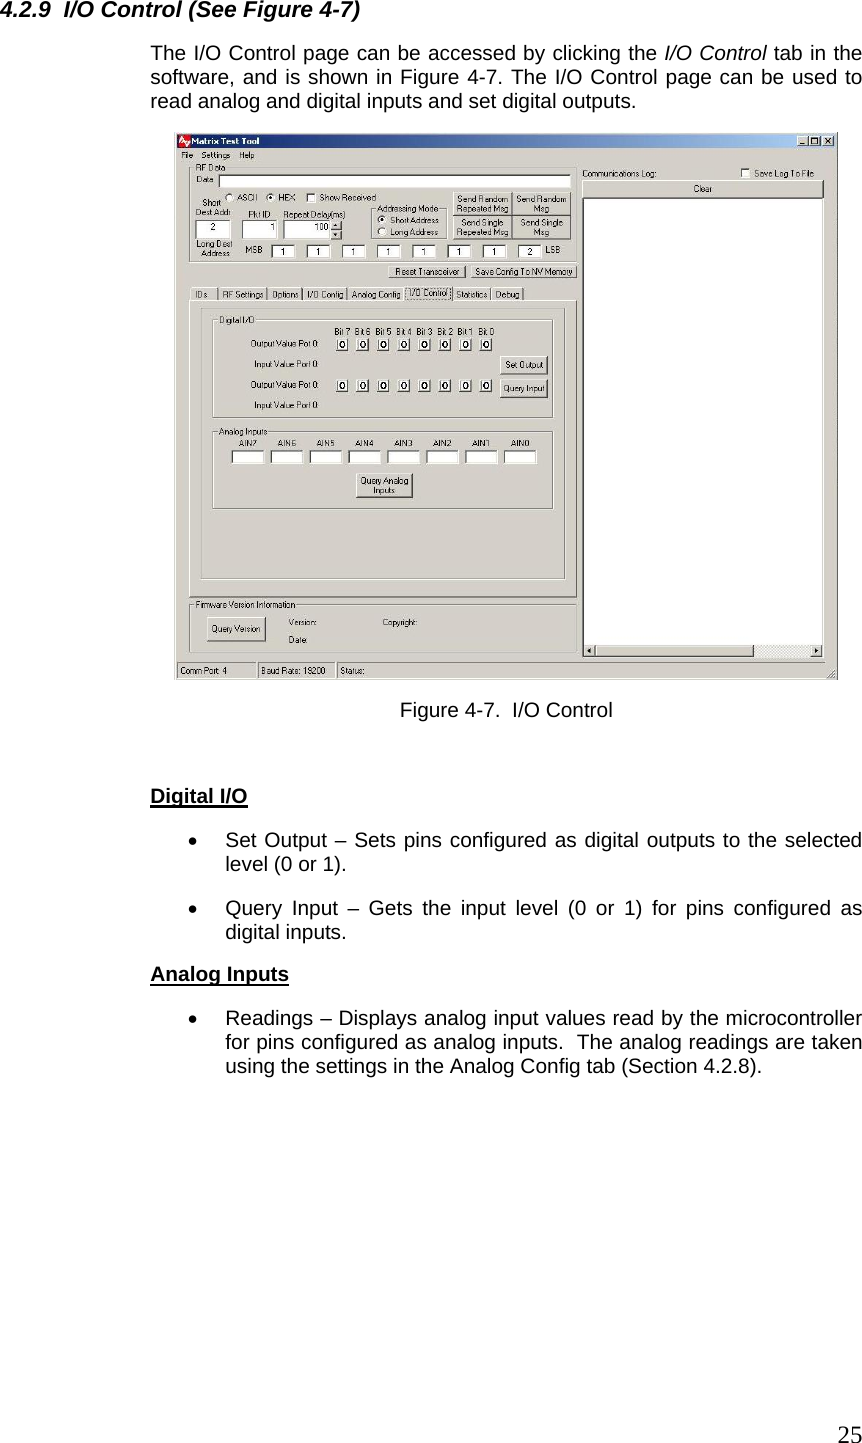  254.2.9  I/O Control (See Figure 4-7) The I/O Control page can be accessed by clicking the I/O Control tab in the software, and is shown in Figure 4-7. The I/O Control page can be used to read analog and digital inputs and set digital outputs.  Figure 4-7.  I/O Control   Digital I/O •  Set Output – Sets pins configured as digital outputs to the selected level (0 or 1). •  Query Input – Gets the input level (0 or 1) for pins configured as digital inputs. Analog Inputs •  Readings – Displays analog input values read by the microcontroller for pins configured as analog inputs.  The analog readings are taken using the settings in the Analog Config tab (Section 4.2.8).  